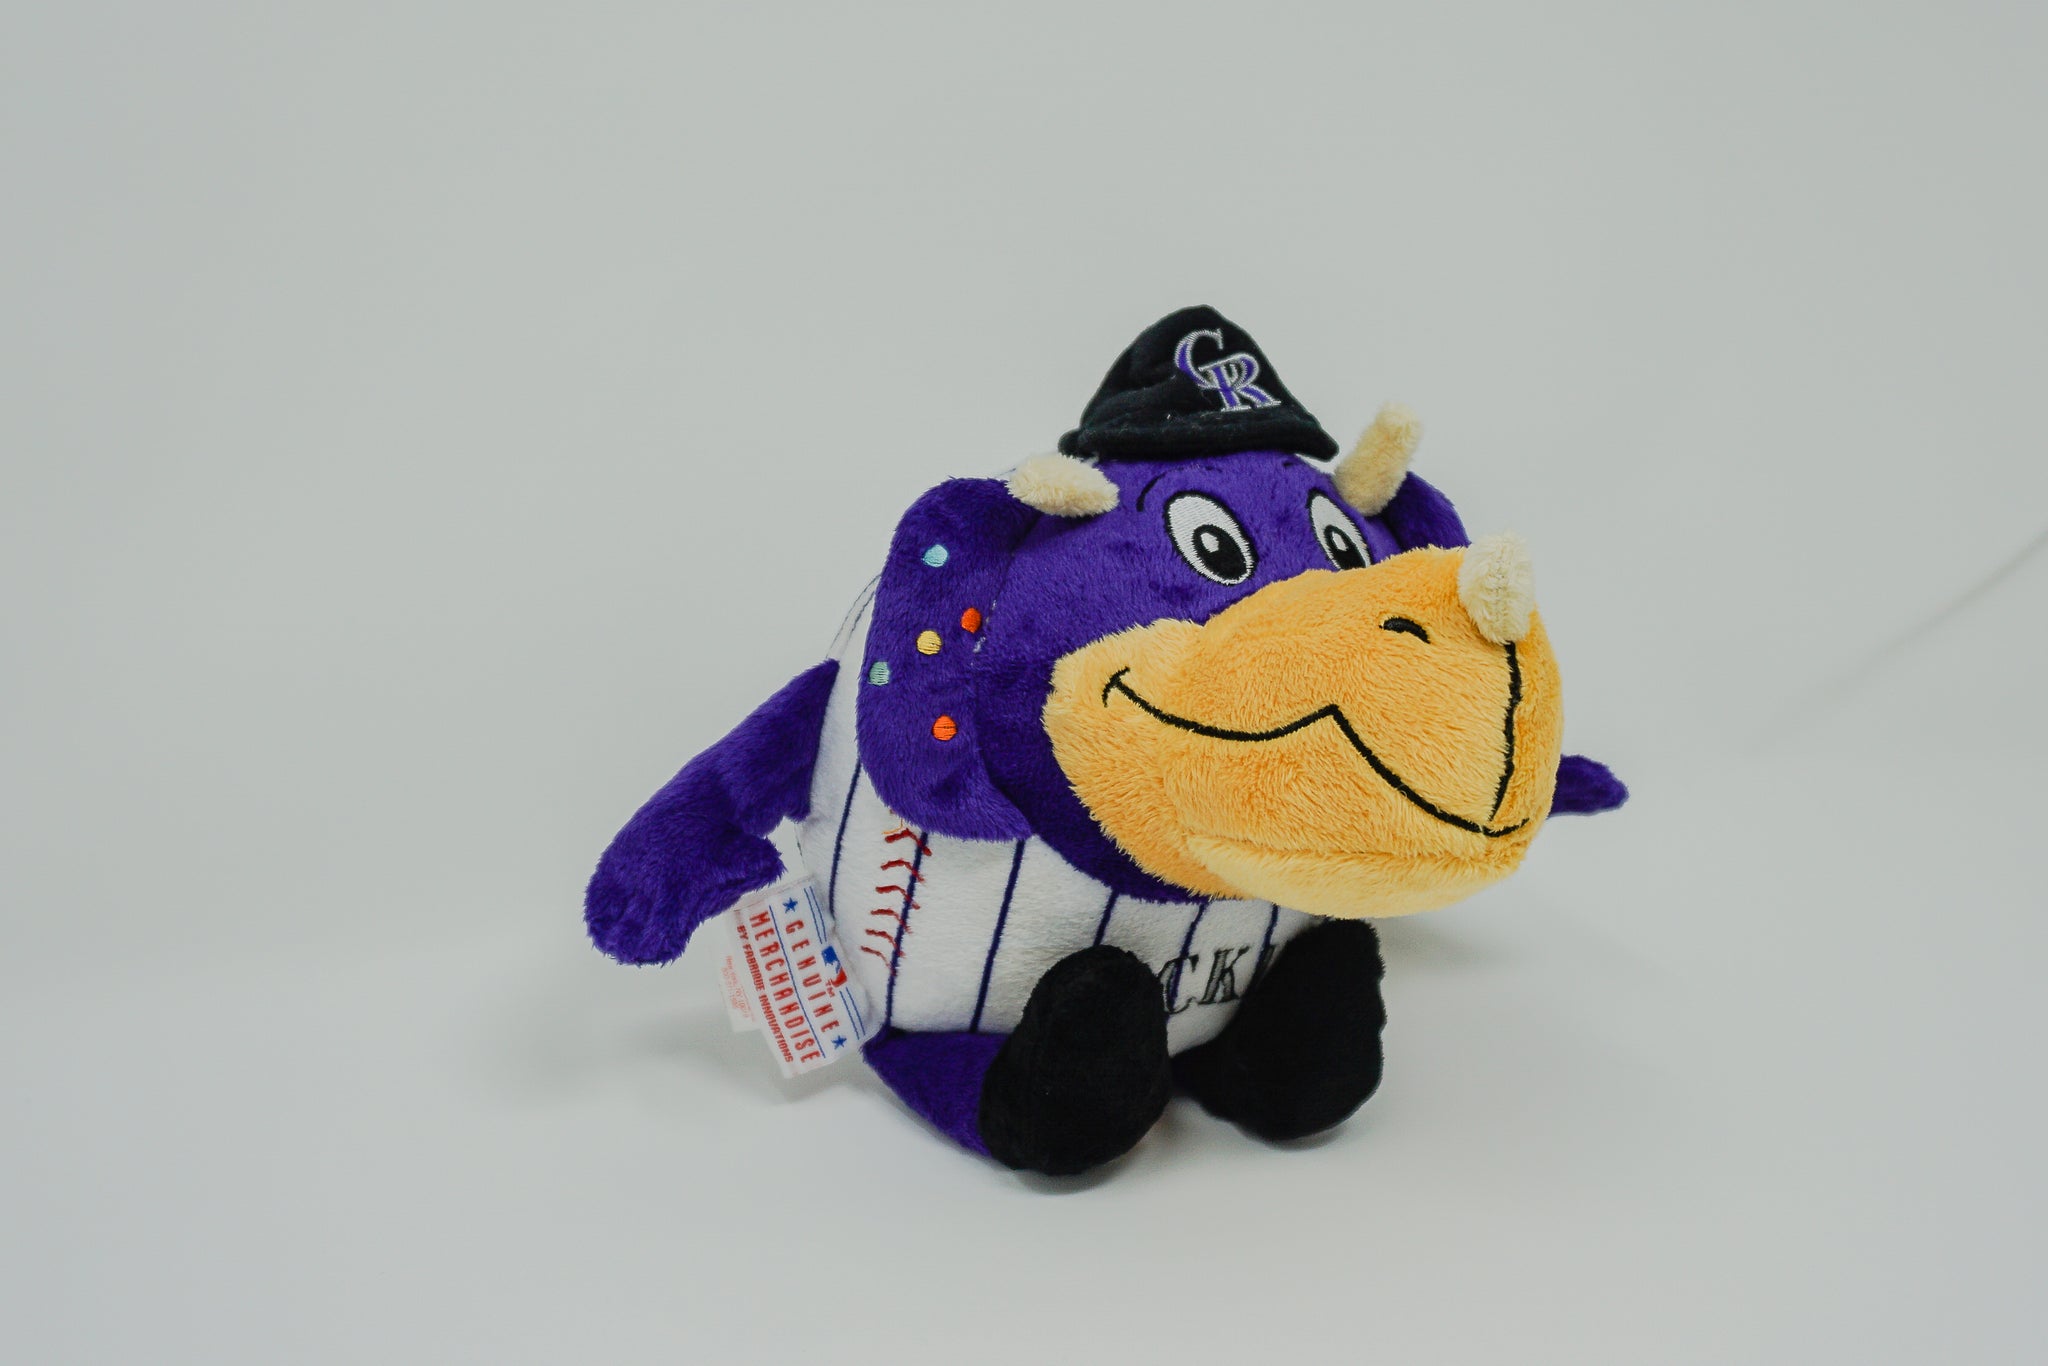 Dinger's Origins: Why a dinosaur represents the Rockies